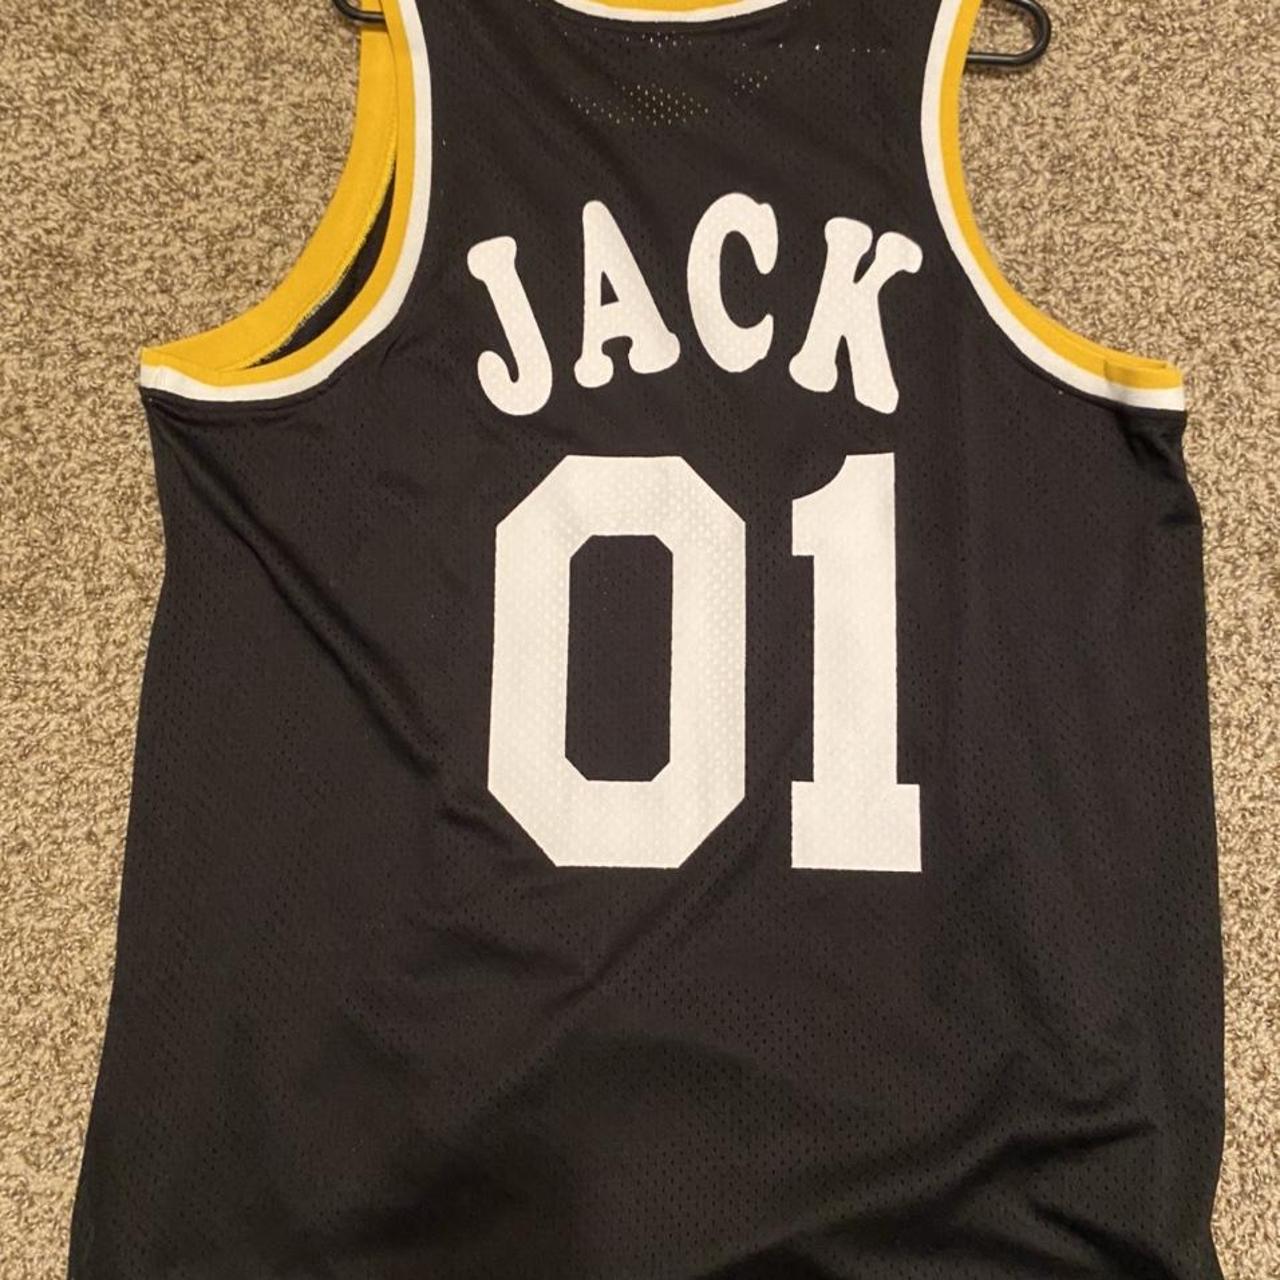 Cactus Jack Rockets Jersey for Sale in Houston, TX - OfferUp